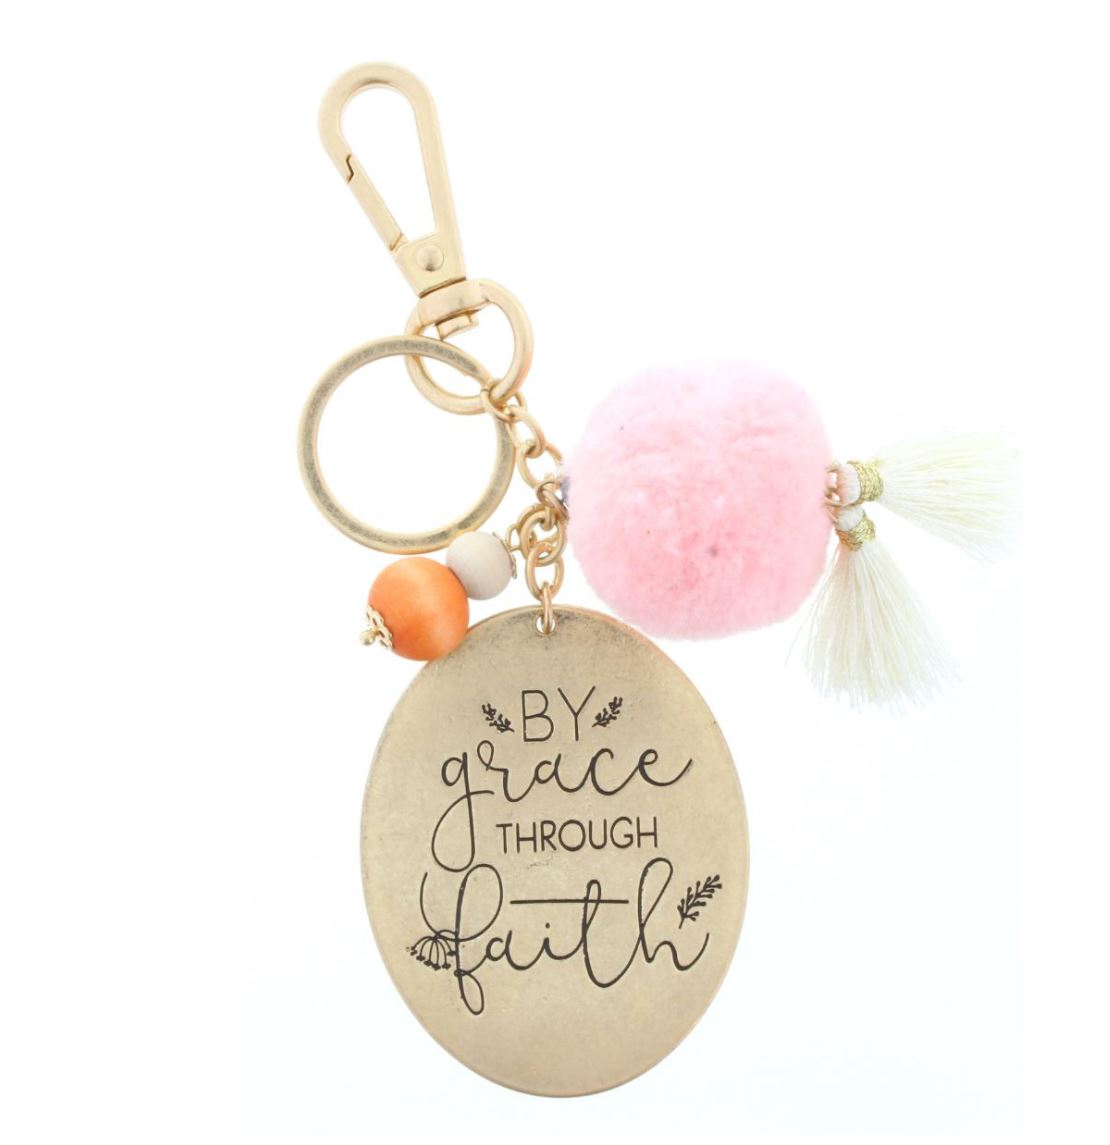 TWO SIDED KEYCHAIN - MULTI IKAT PATTERN/ "BY GRACE THROUGH FAITH" WITH POM & TASSEL ACCENT KEYCHAIN